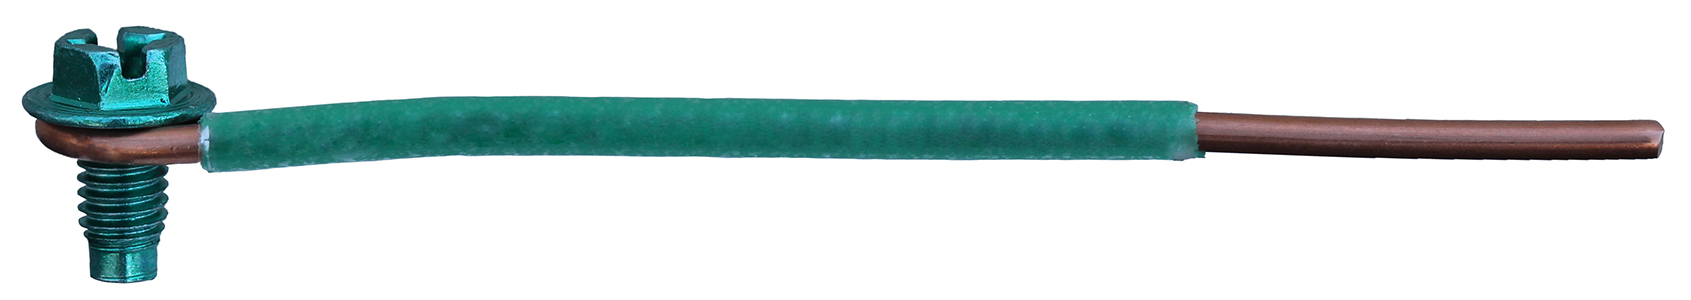 Ground Pigtail, 12-1/2 in. Size, 12 GA thickness